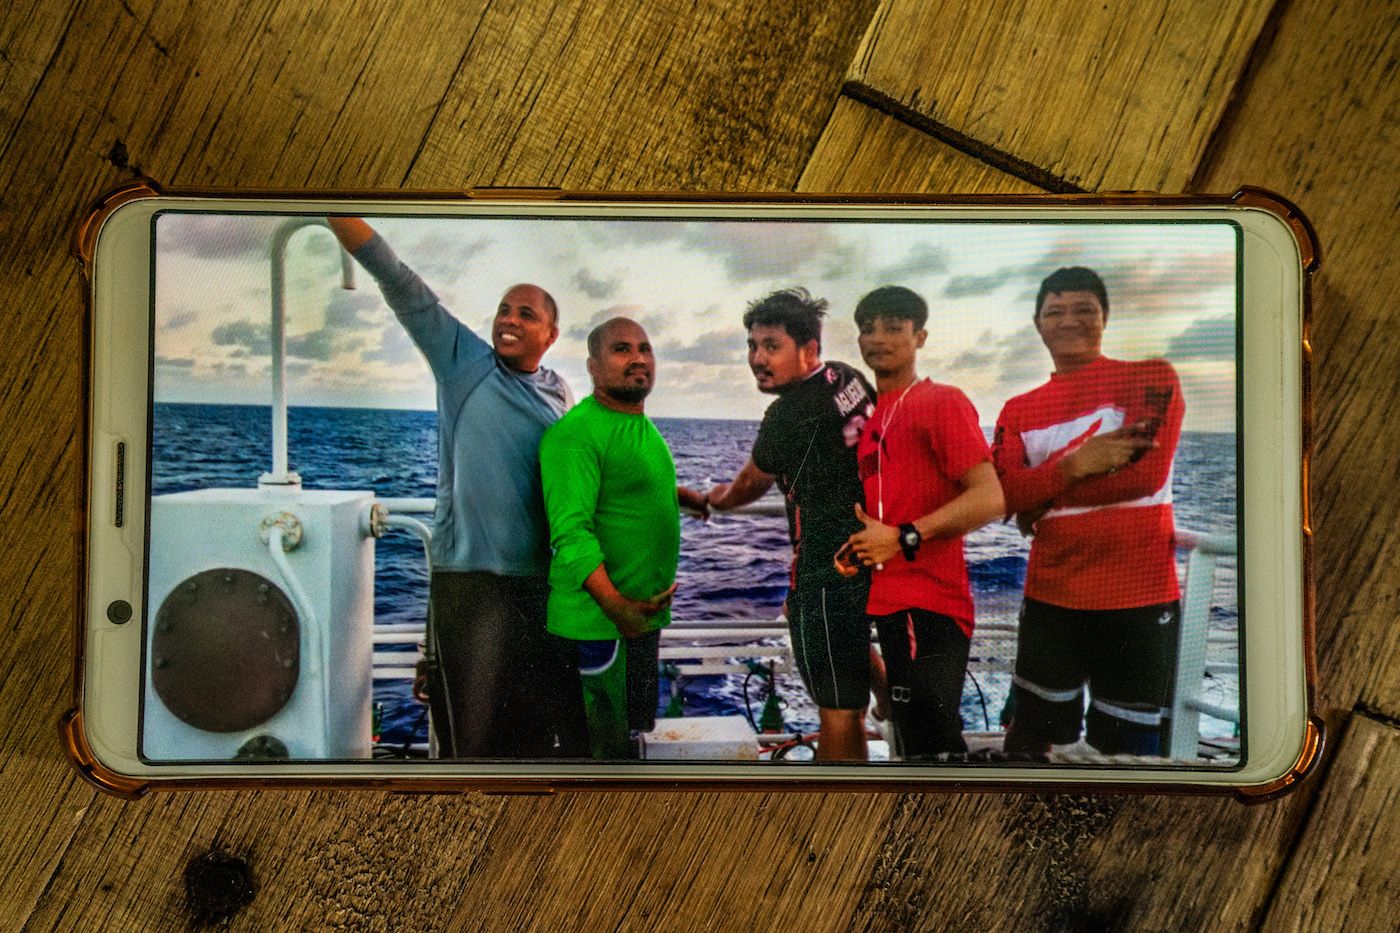 SEAFARERS. Jesus Gaboni (leftmost), with other Filipino crew aboard their fishing vessel. The man on the rightmost, Raul Calopez, got sick onboard and eventually died. Gaboni helped store Calopez's body in the ship's freezer. Image by Martin San Diego.

